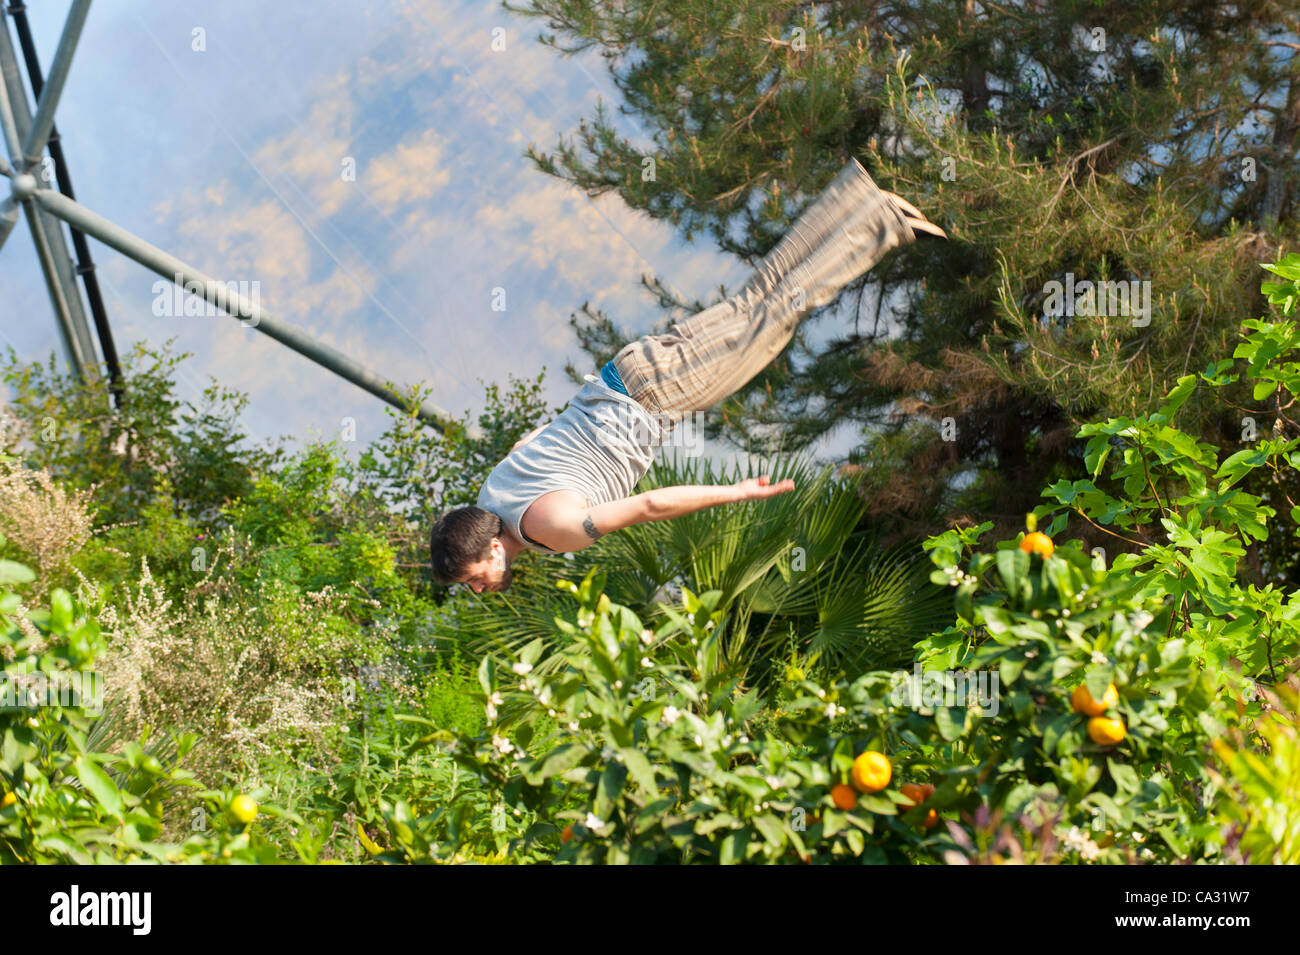 St Austell, Cornwall, UK. 29 March, 2012. Members of NoFit State Circus perform at the Eden Project for the press launch of their new show. Following last year's sellout-success, the circus will be performing at the Eden Project again in July 2012. Stock Photo